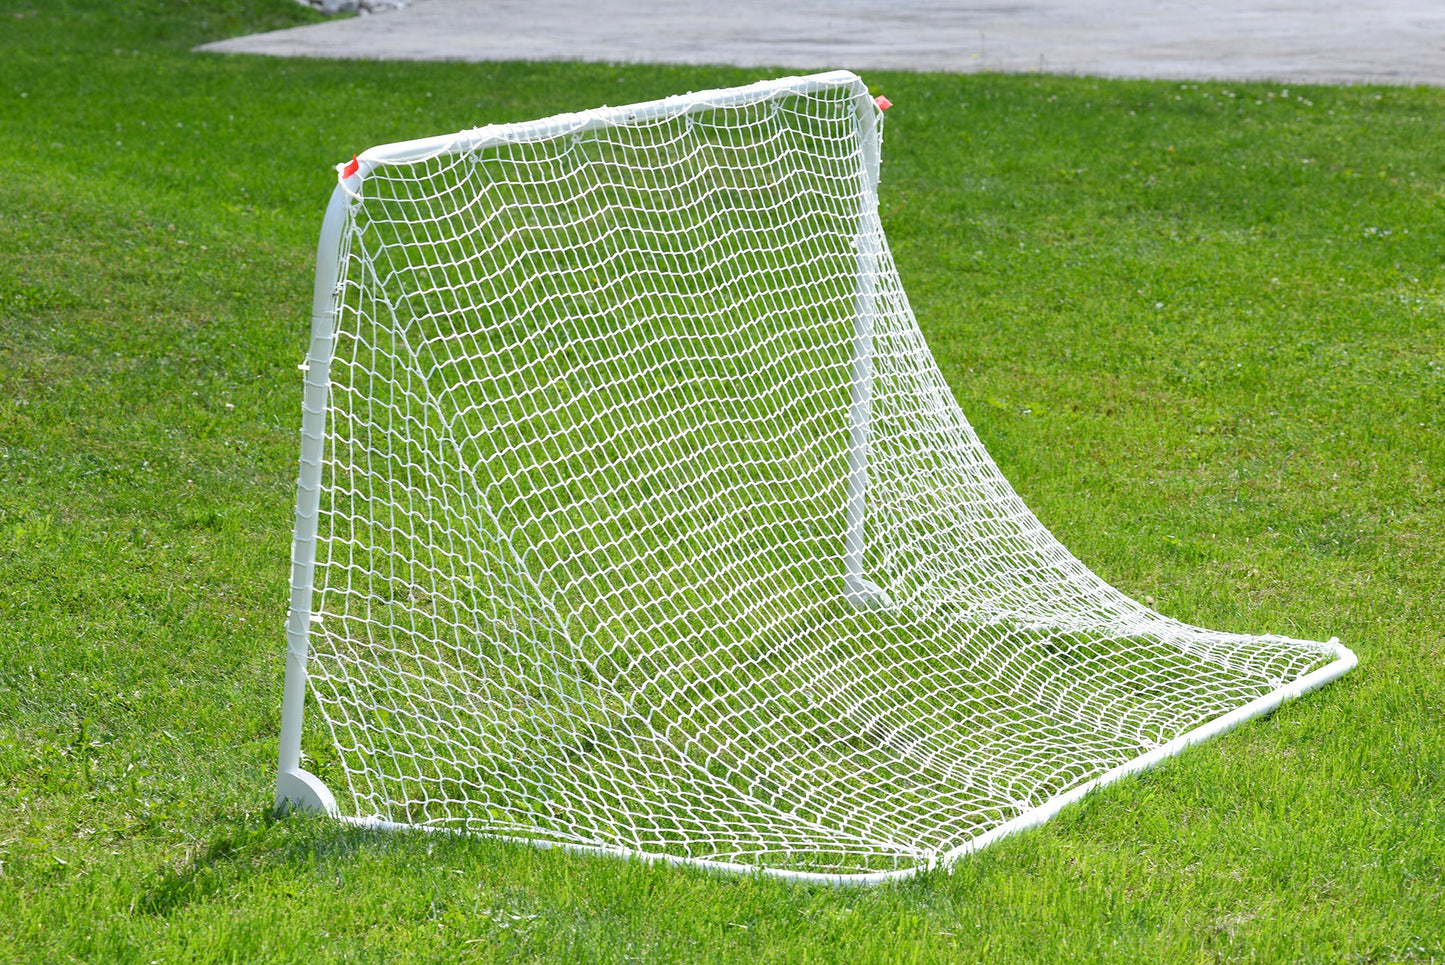 The "Shots on Goal" Package